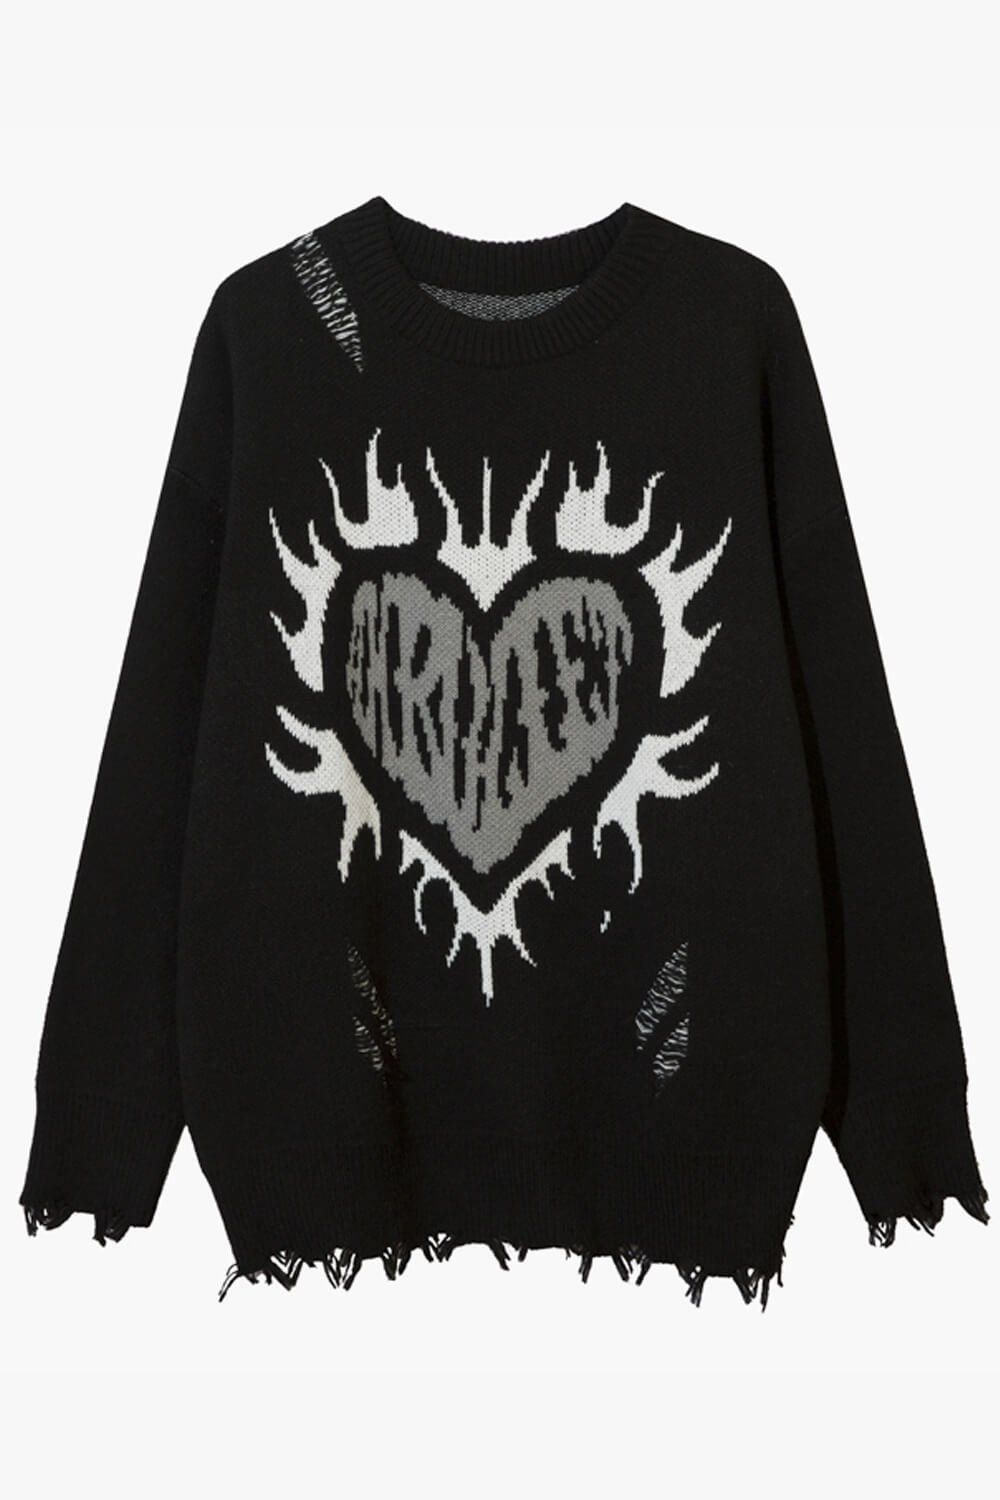 Black Heart in Flames Ripped Sweater